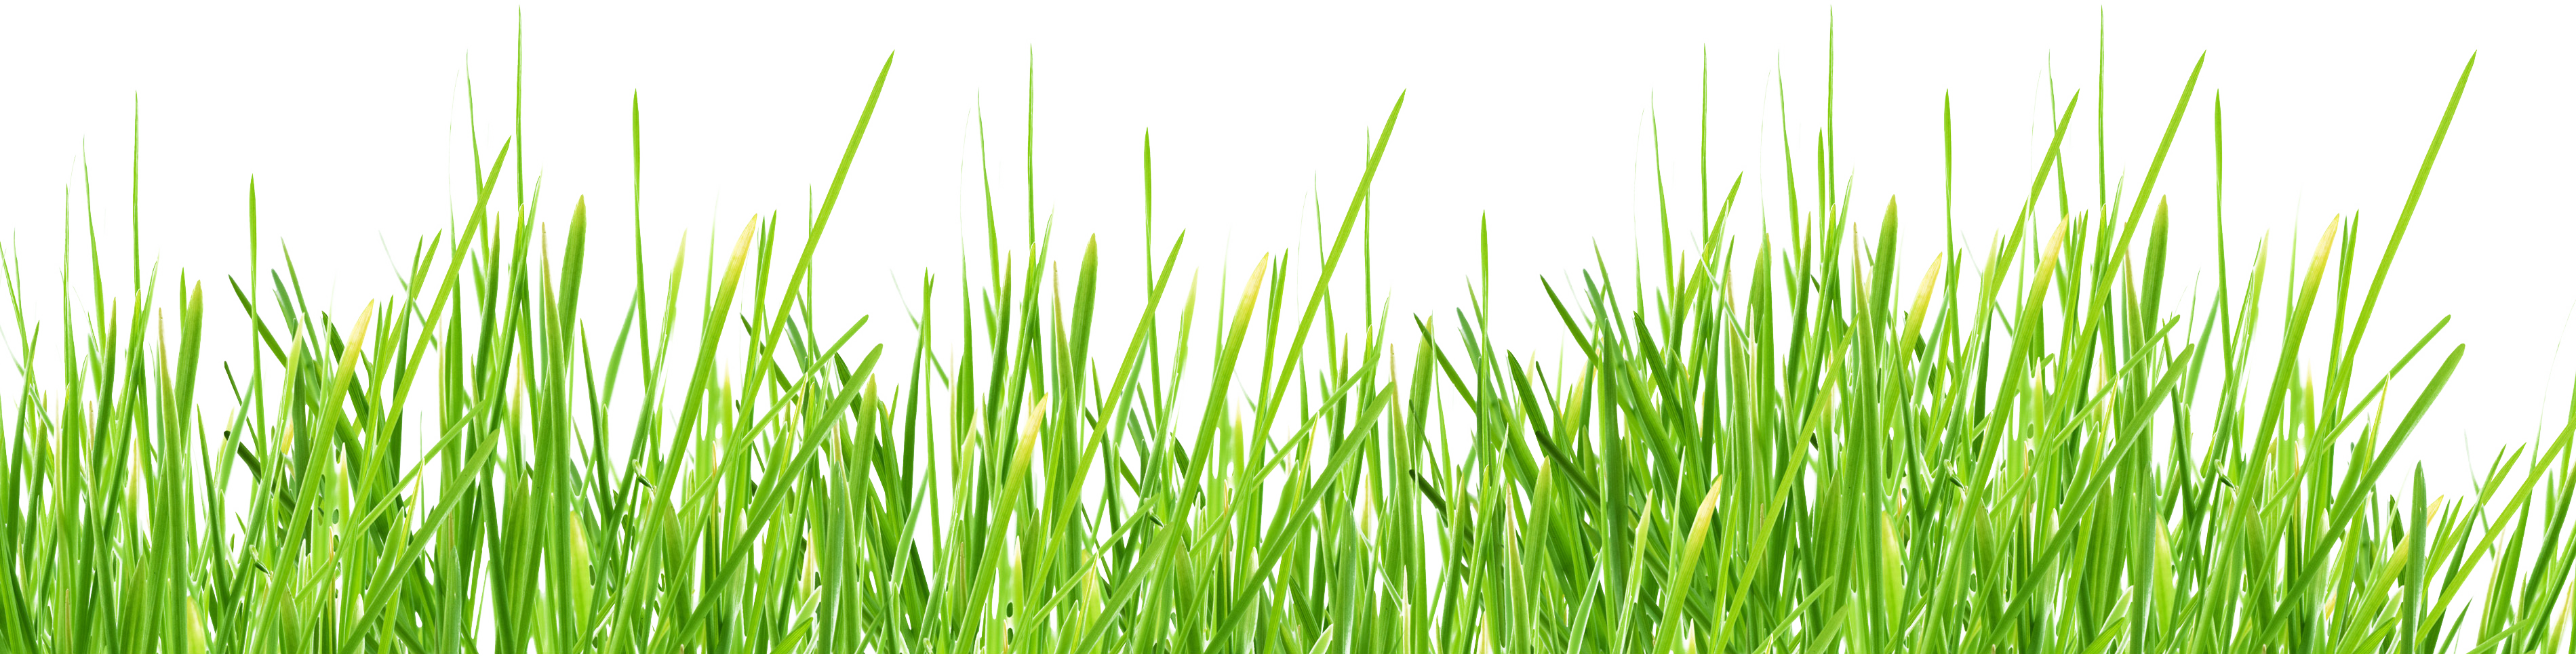 Green Grass Eighteen | Isolated Stock Photo by noBACKS.com